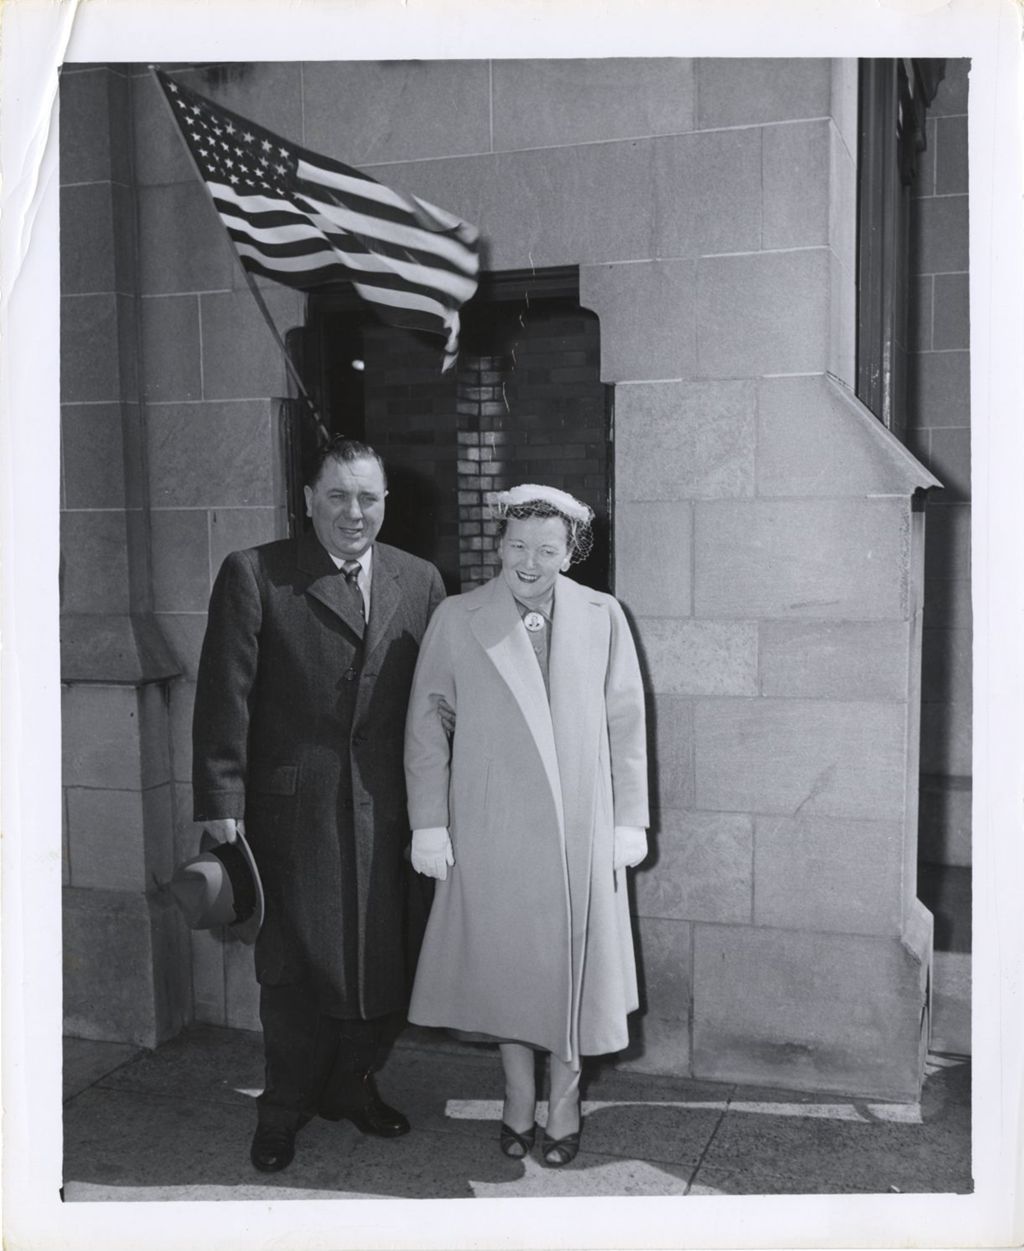 Miniature of Richard J. Daley and Eleanor Daley outside 11th Ward polling place